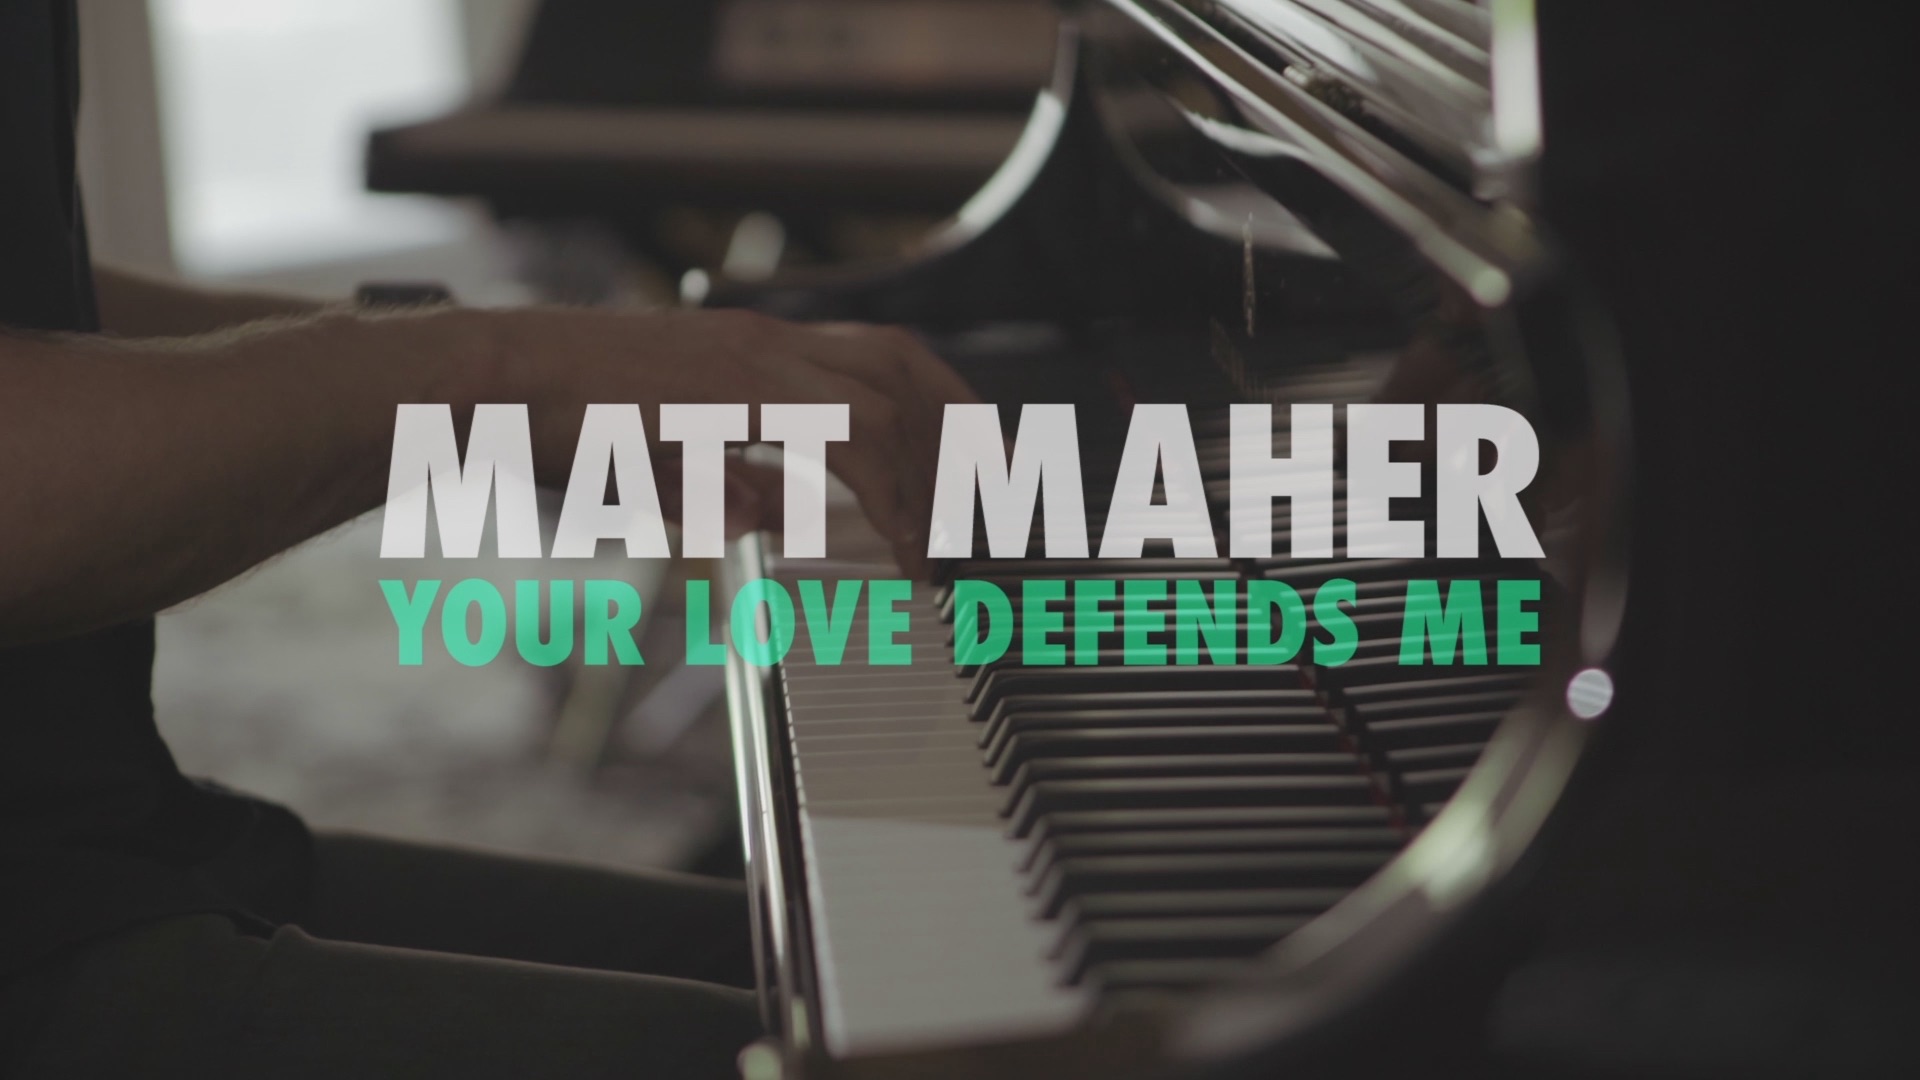 Your Love Defends Me - song and lyrics by Matt Maher